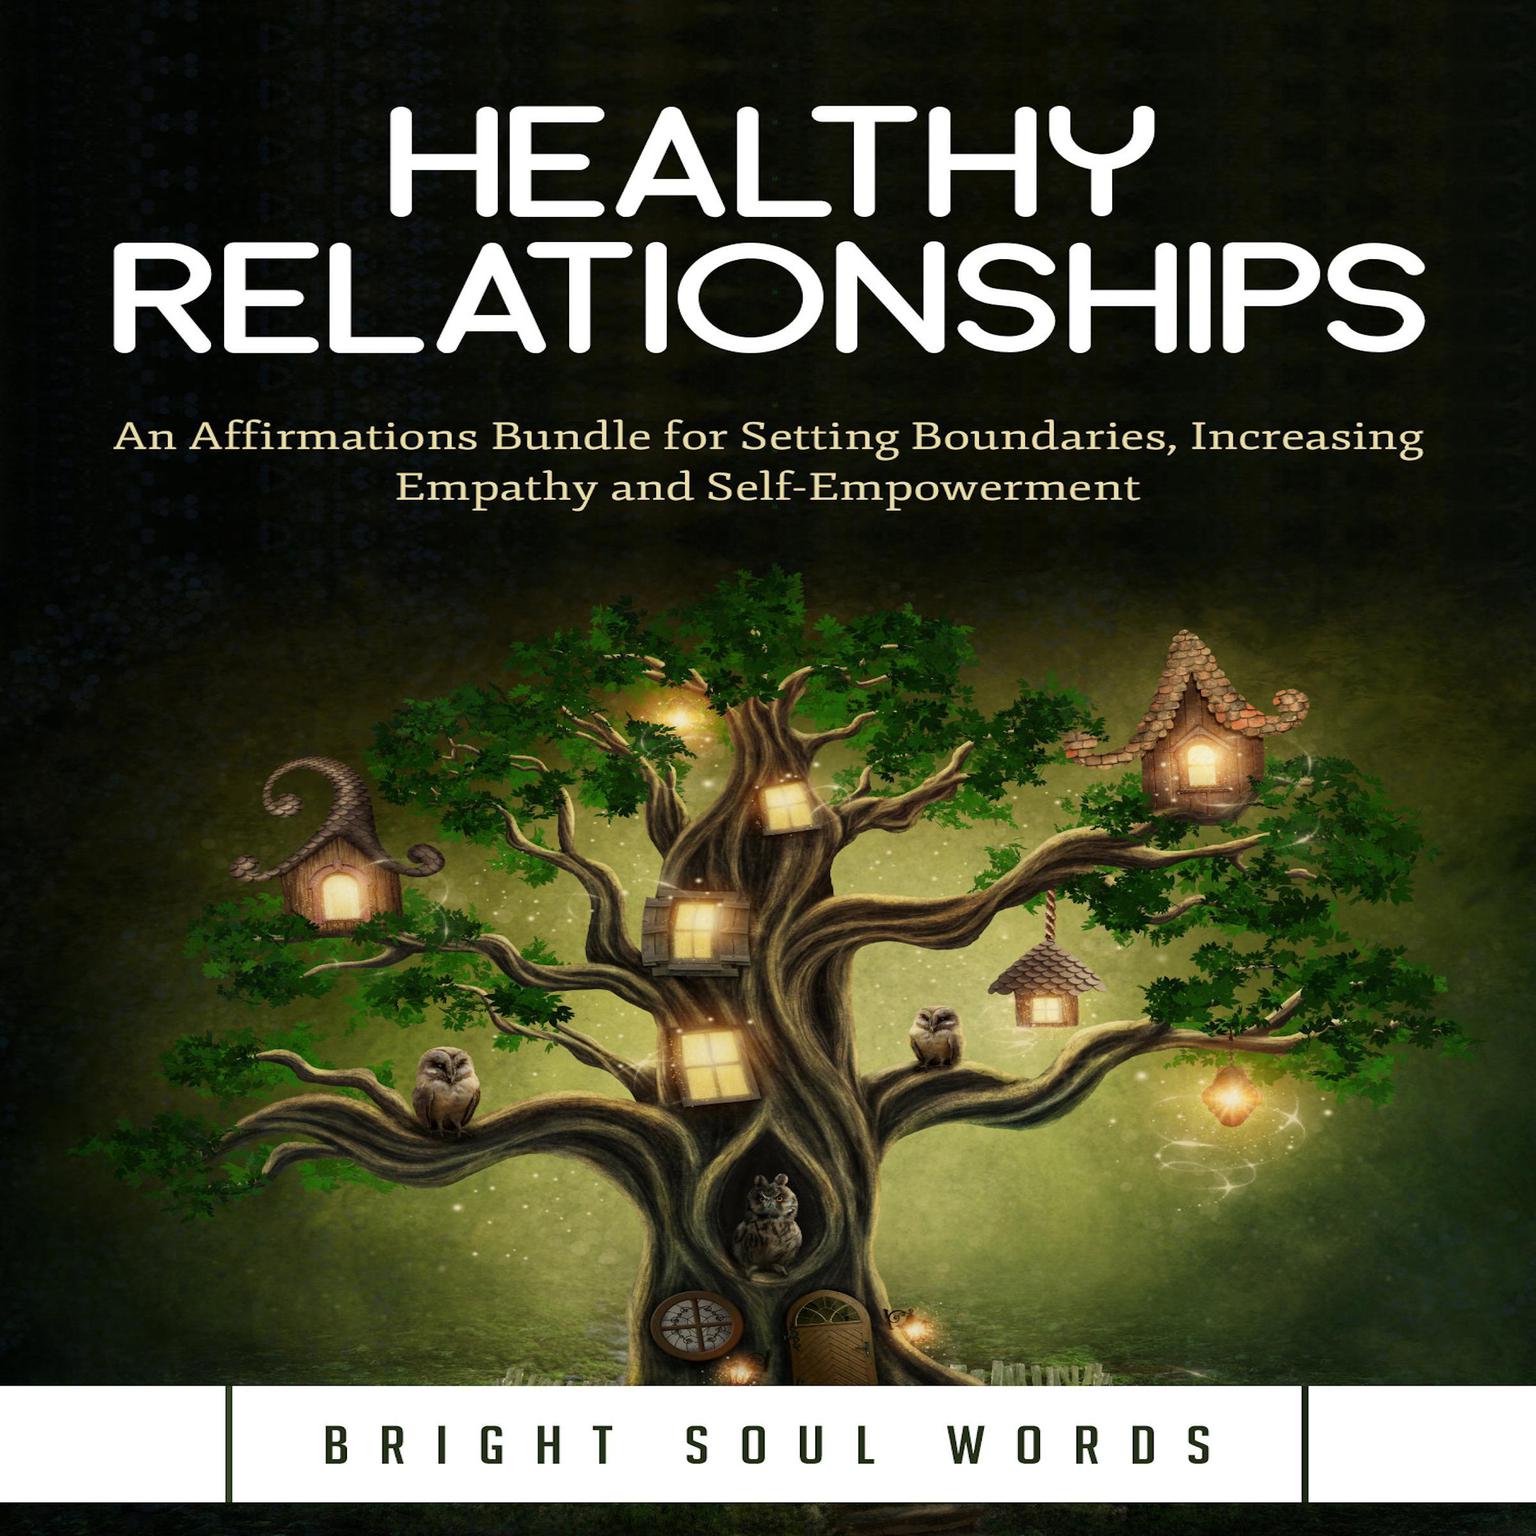 Healthy Relationships: An Affirmations Bundle for Setting Boundaries, Increasing Empathy and Self-Empowerment Audiobook, by Bright Soul Words